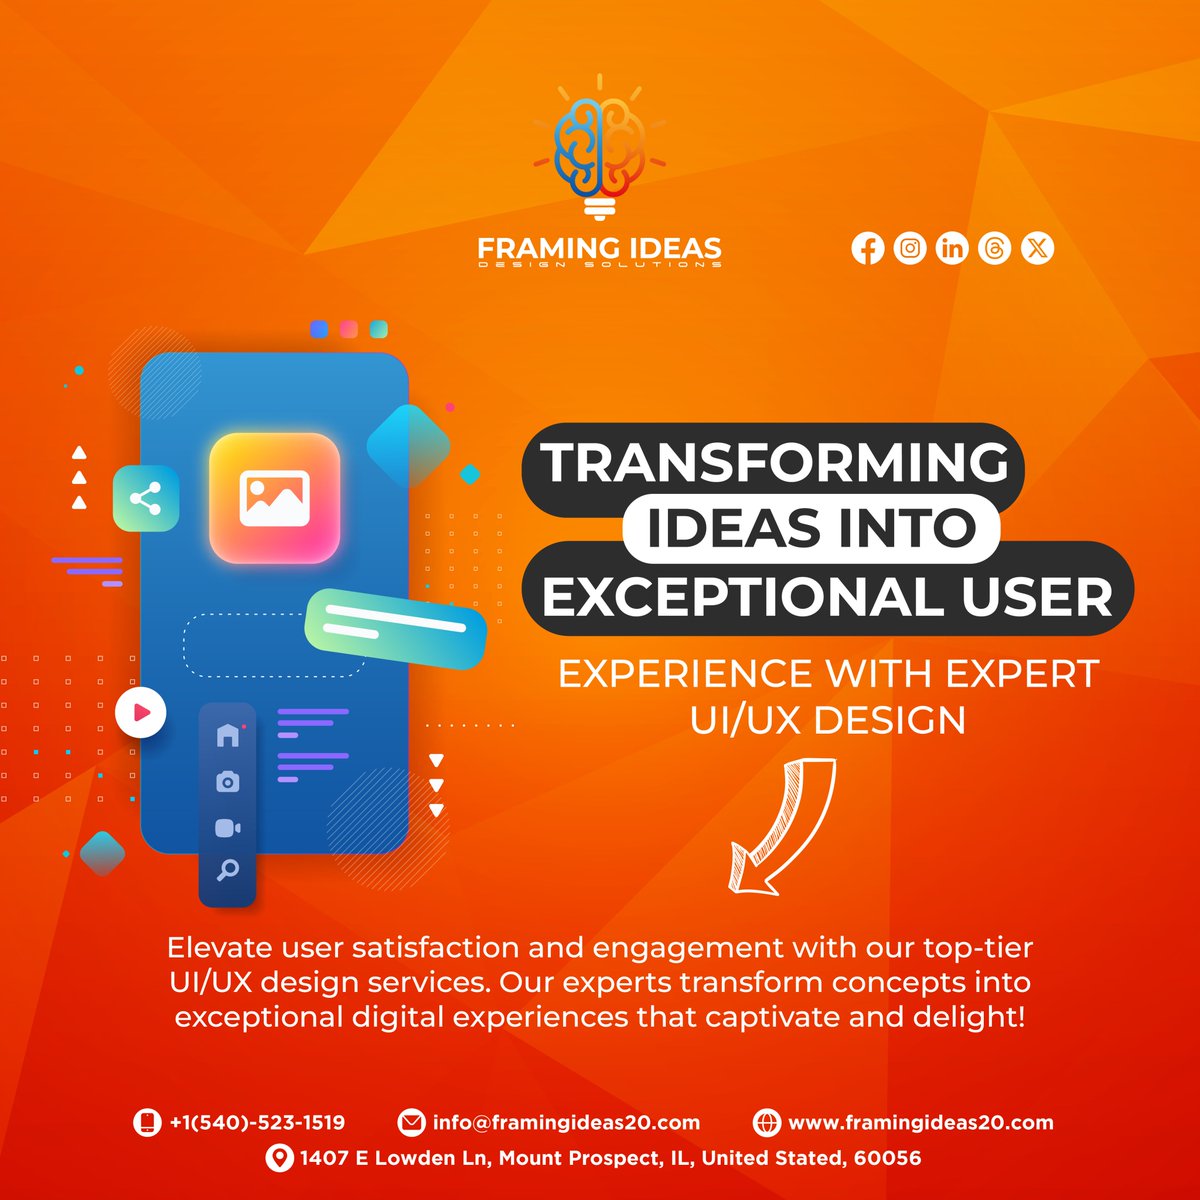 ✏️ Transforming Ideas into Exceptional User Experiences with Expert UI/UX Design!

#framingideas #framingideas20 #UIUXDesign #UserExperience #UserInterface #DesignMagic #UserCentric #SleekDesign #VisualAppeal #IntuitiveDesign #CraftingExperiences #businessowner #CEO #entrepreneur